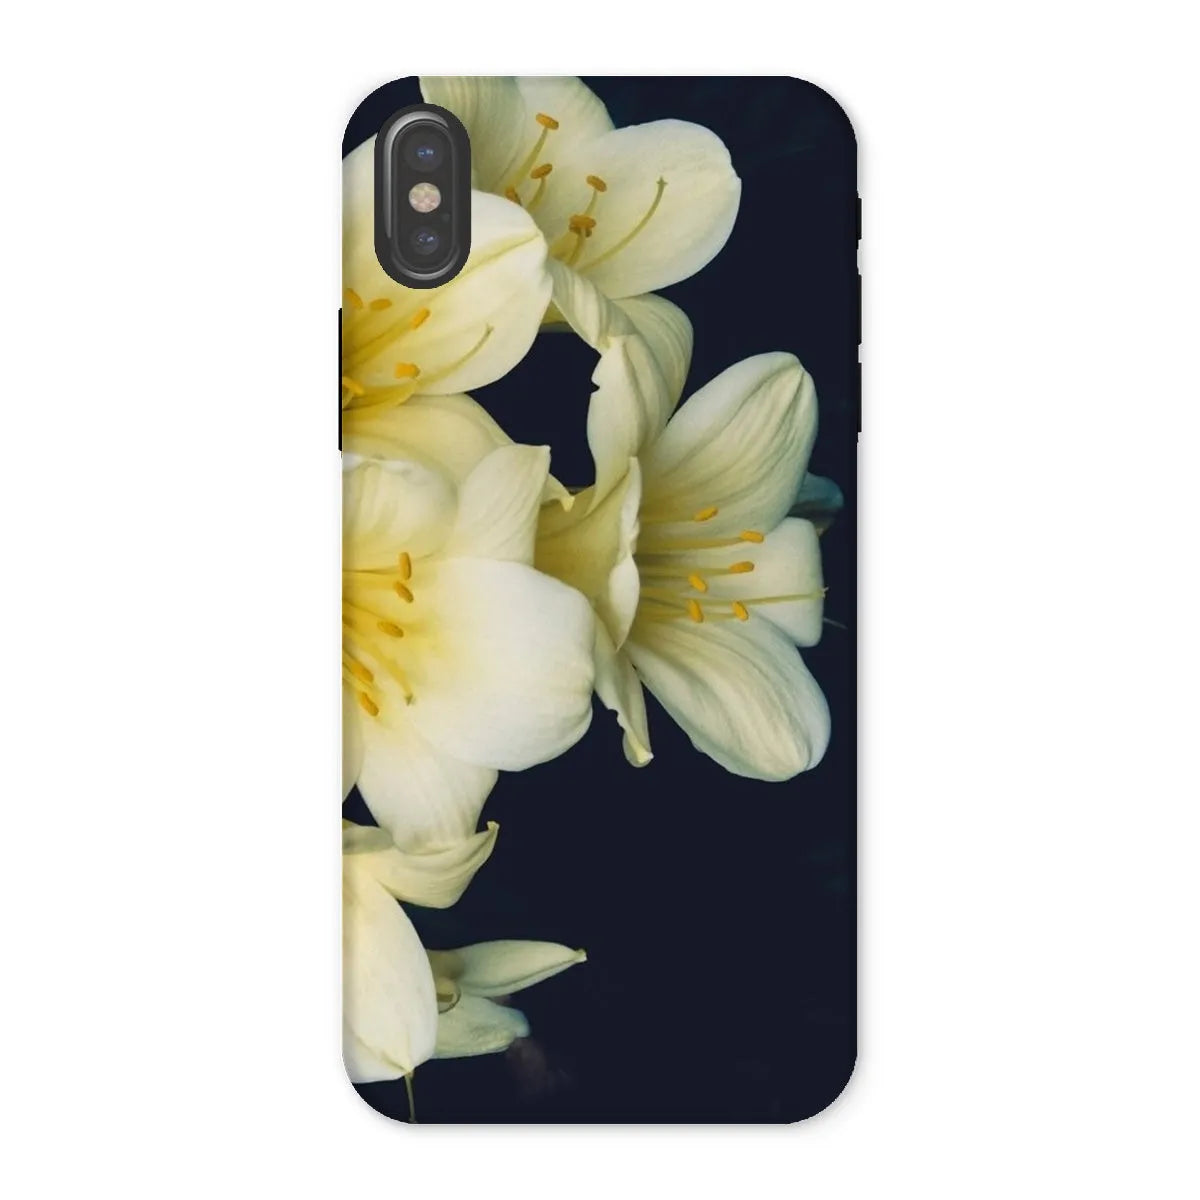 Flower Power Too Tough Phone Case - Iphone x / Matte - Mobile Phone Cases - Aesthetic Art